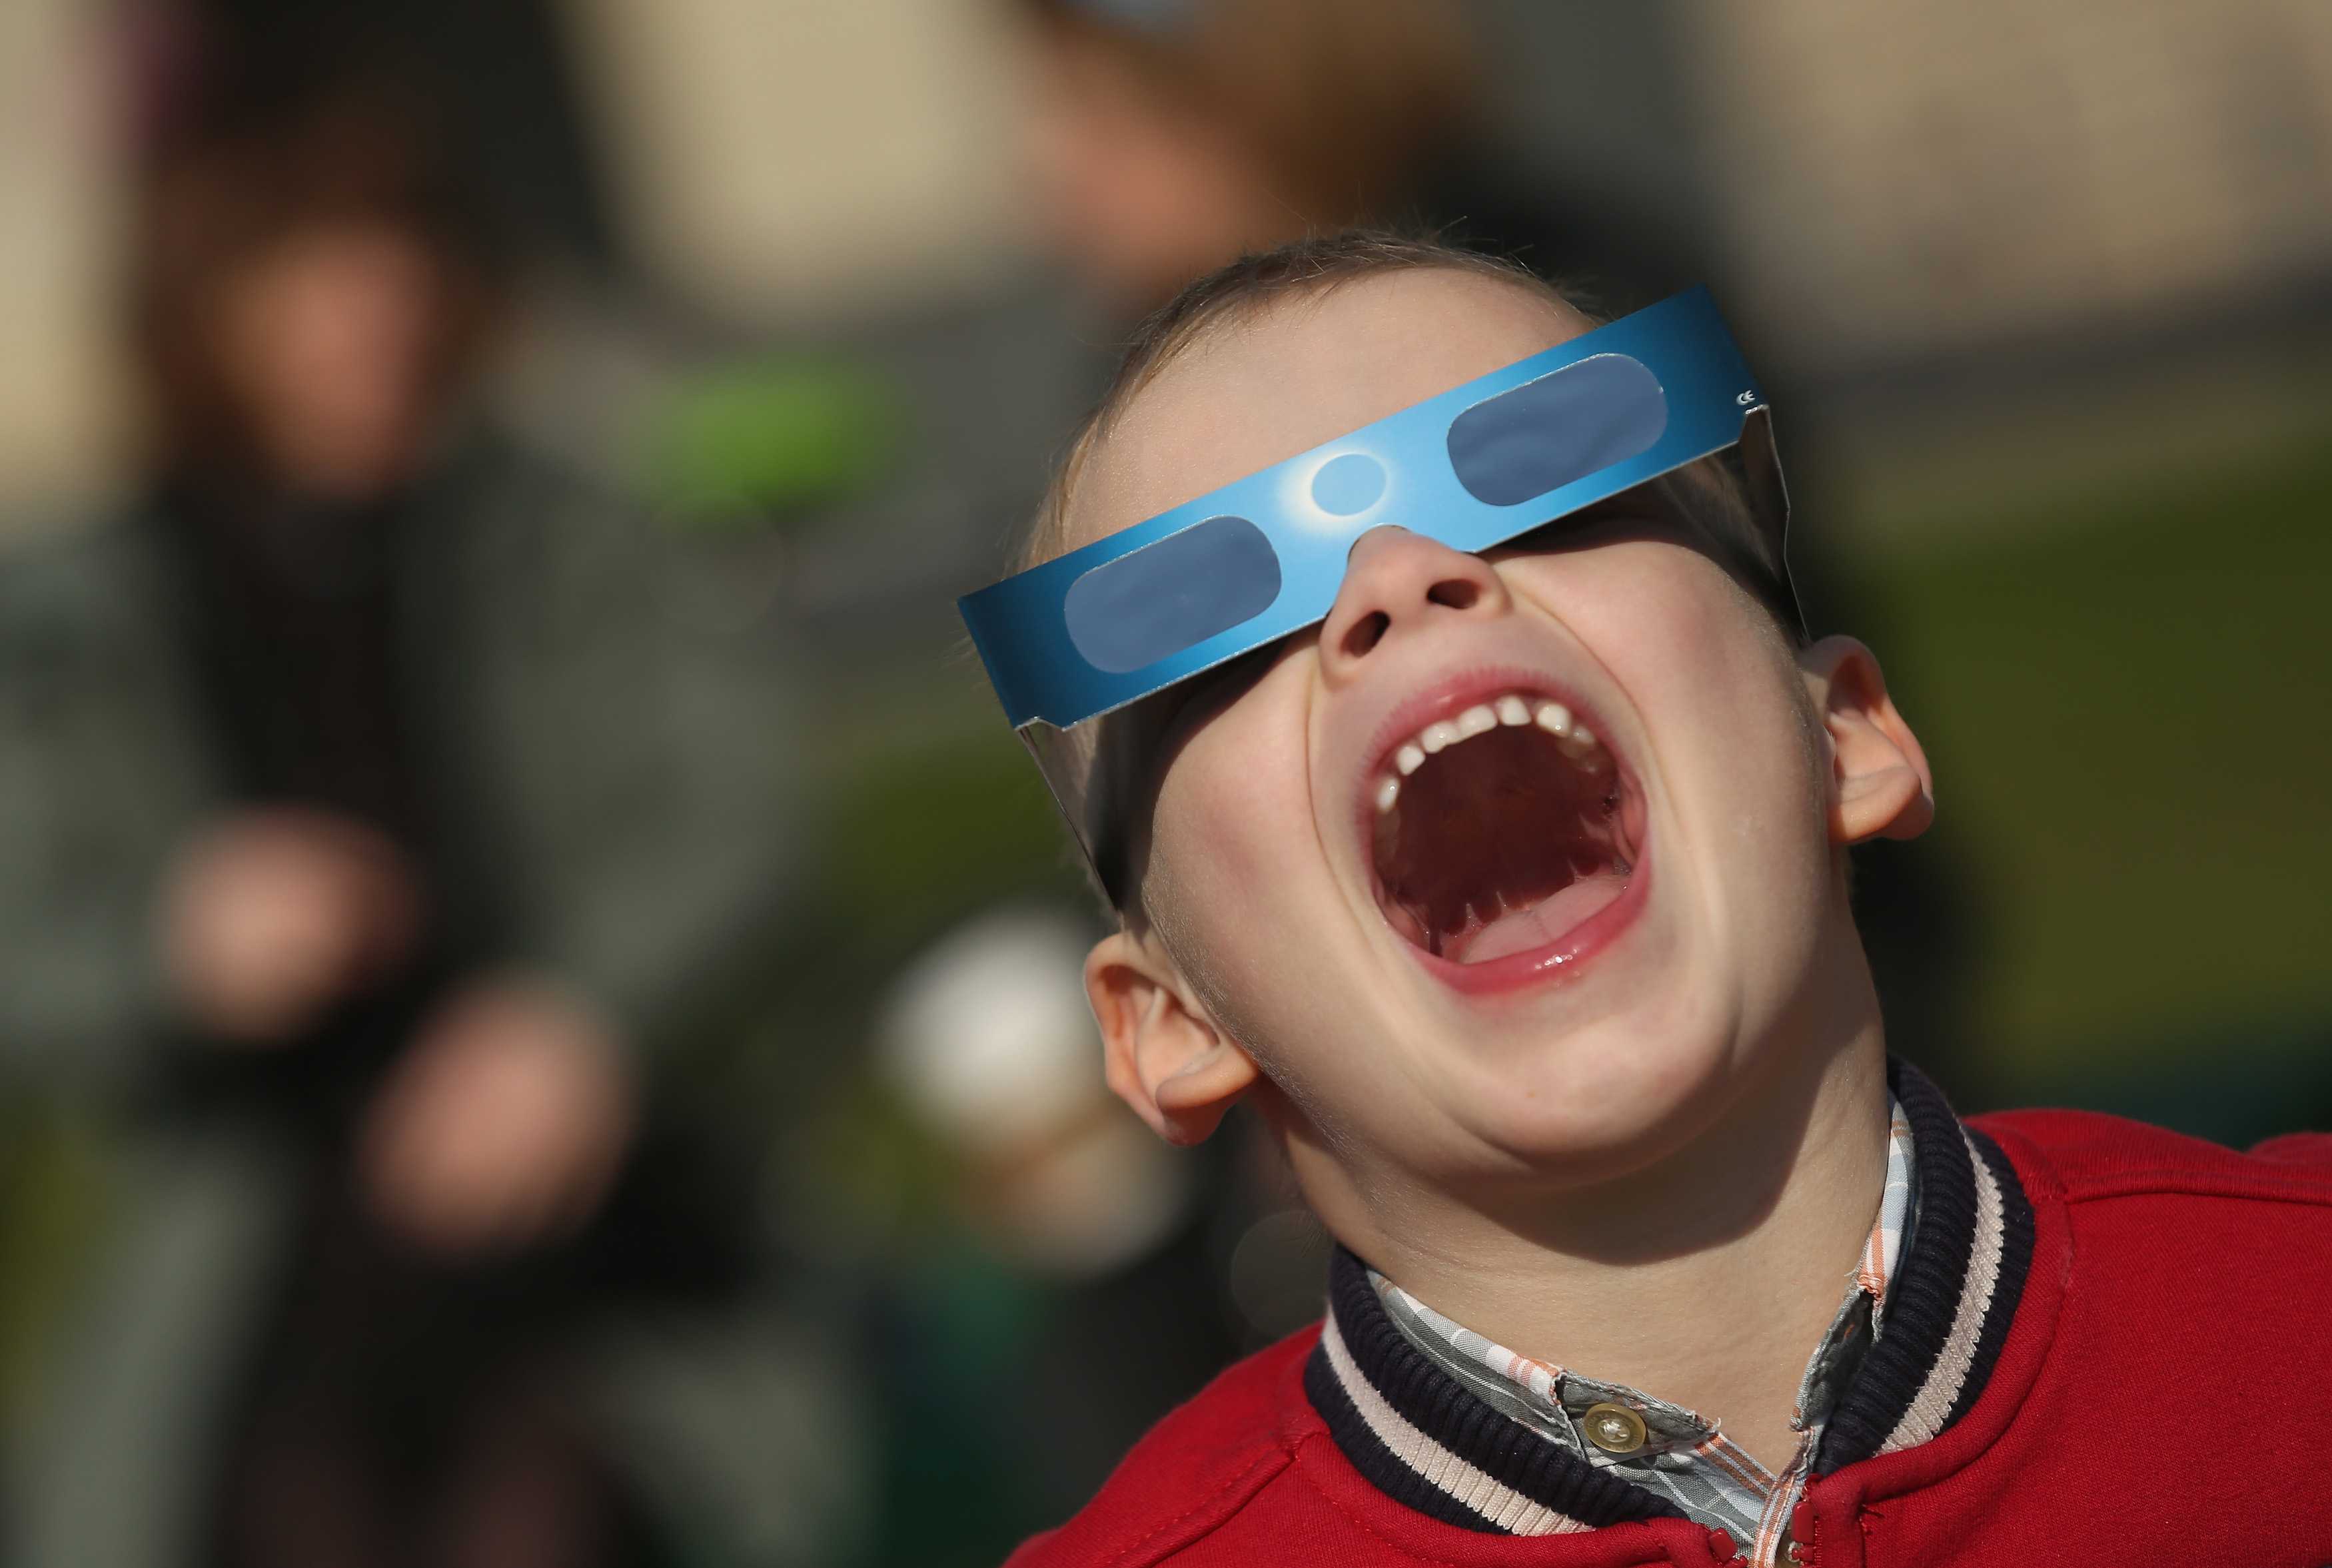 Here's how you can tell if you accidentally bought fake solar eclipse glasses